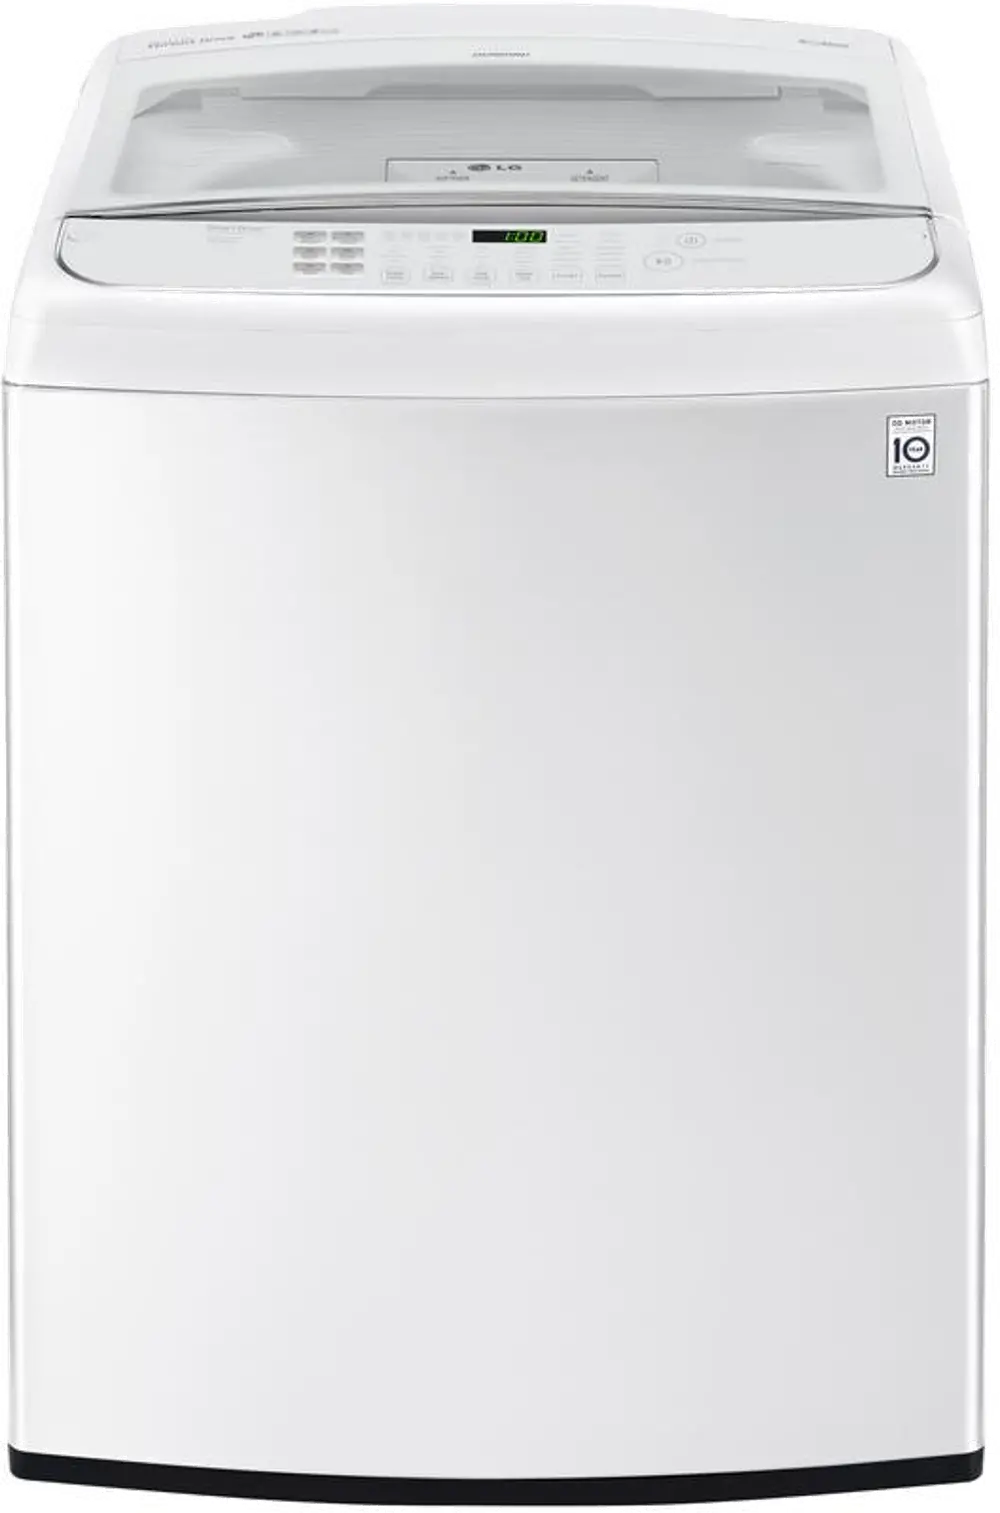 WT1901CW LG Front Control Top Load Washer - 5.0 cu. ft.  White-1